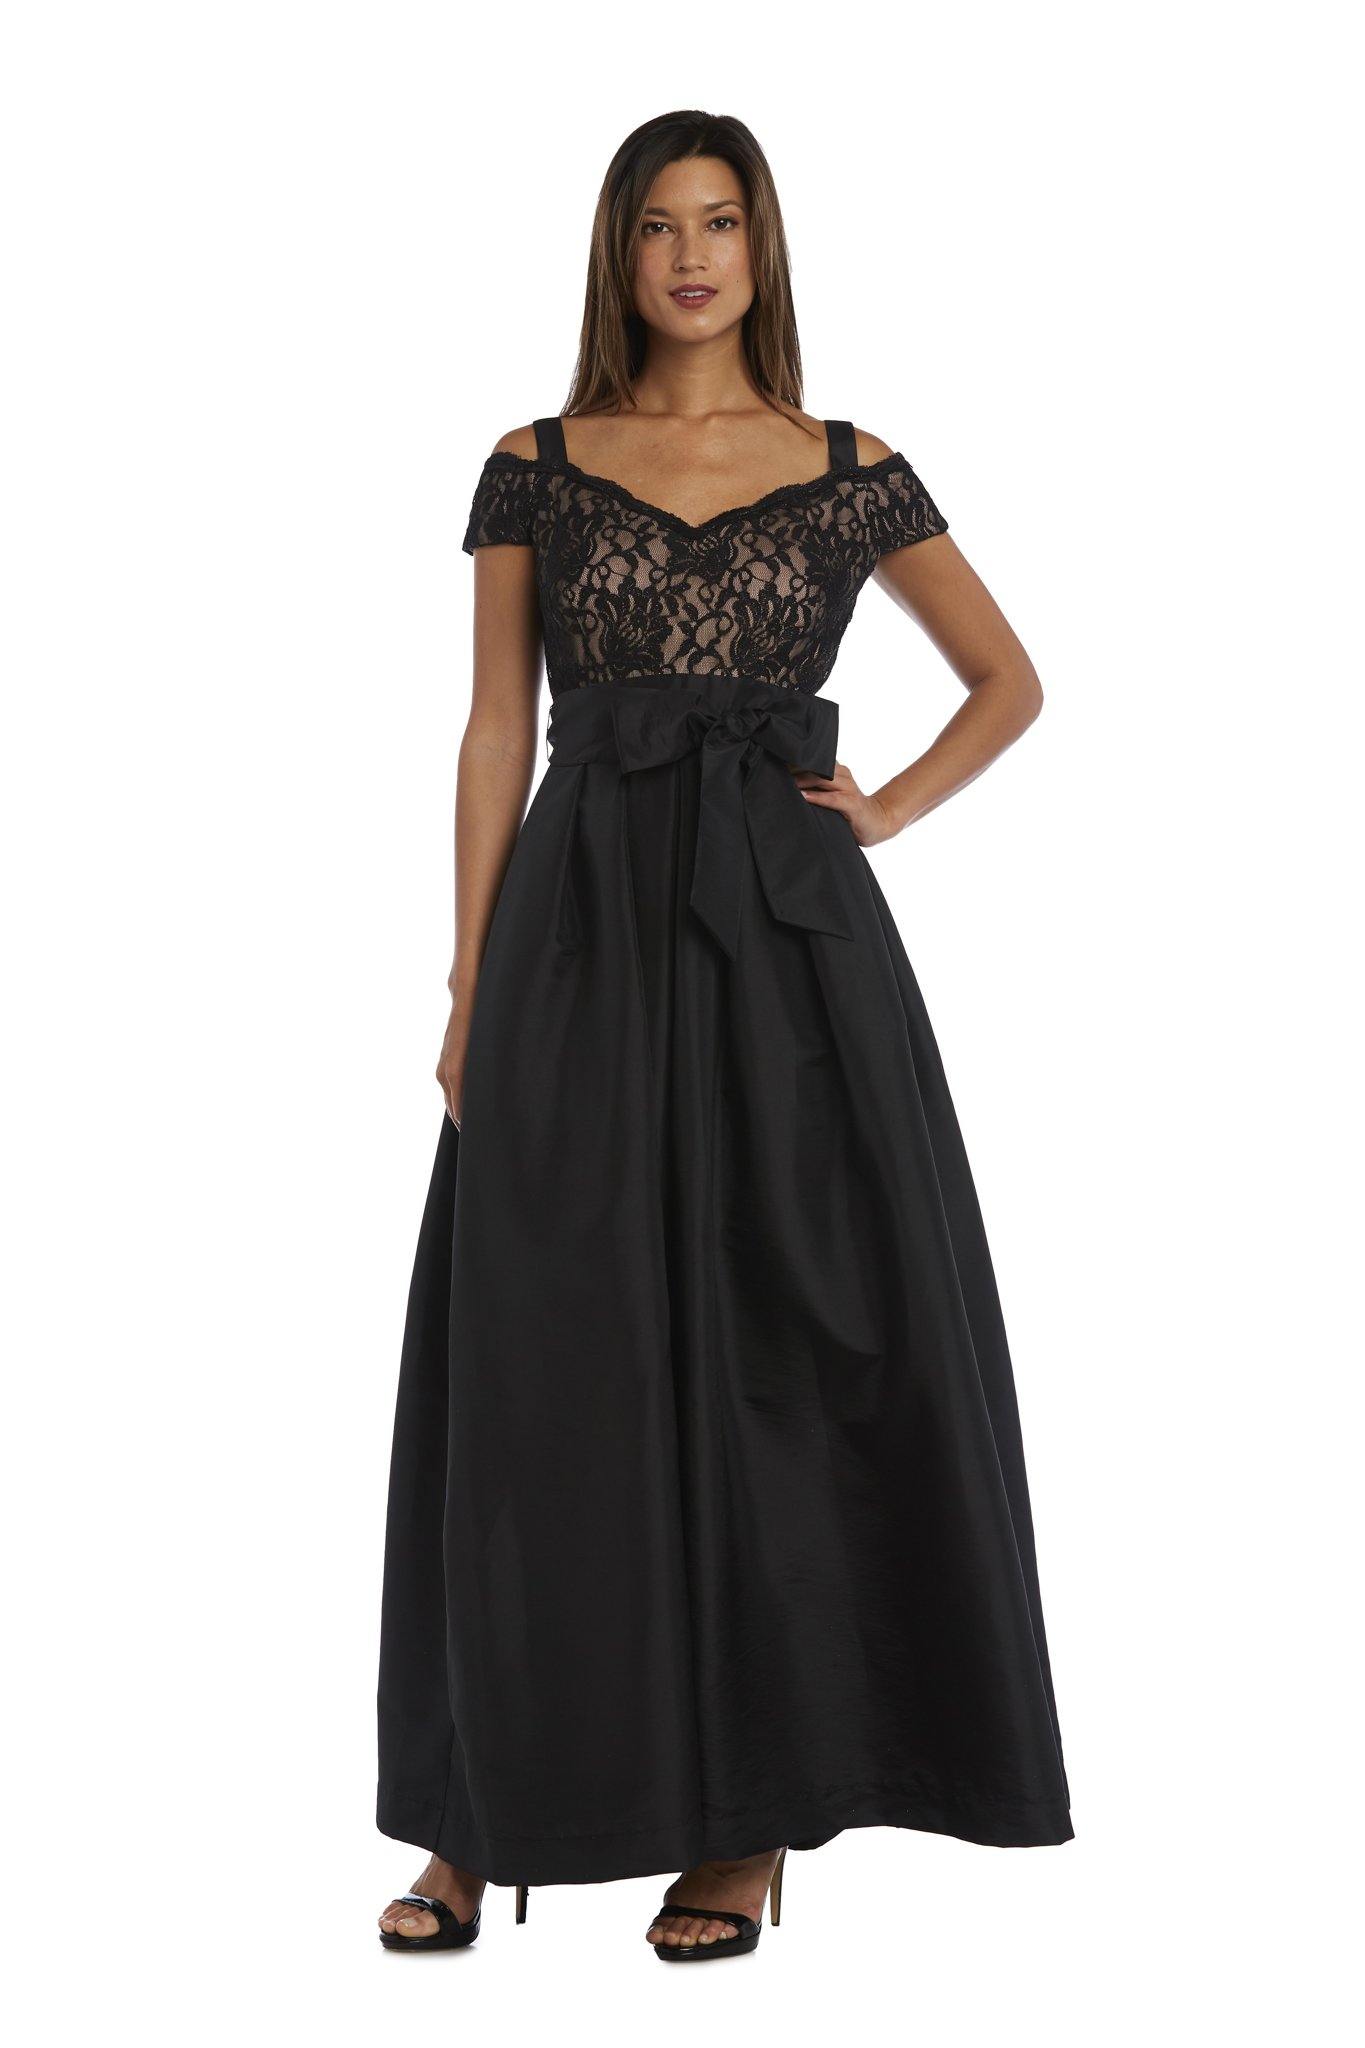 Evening Long Formal Lace Top Dress Sale - The Dress Outlet